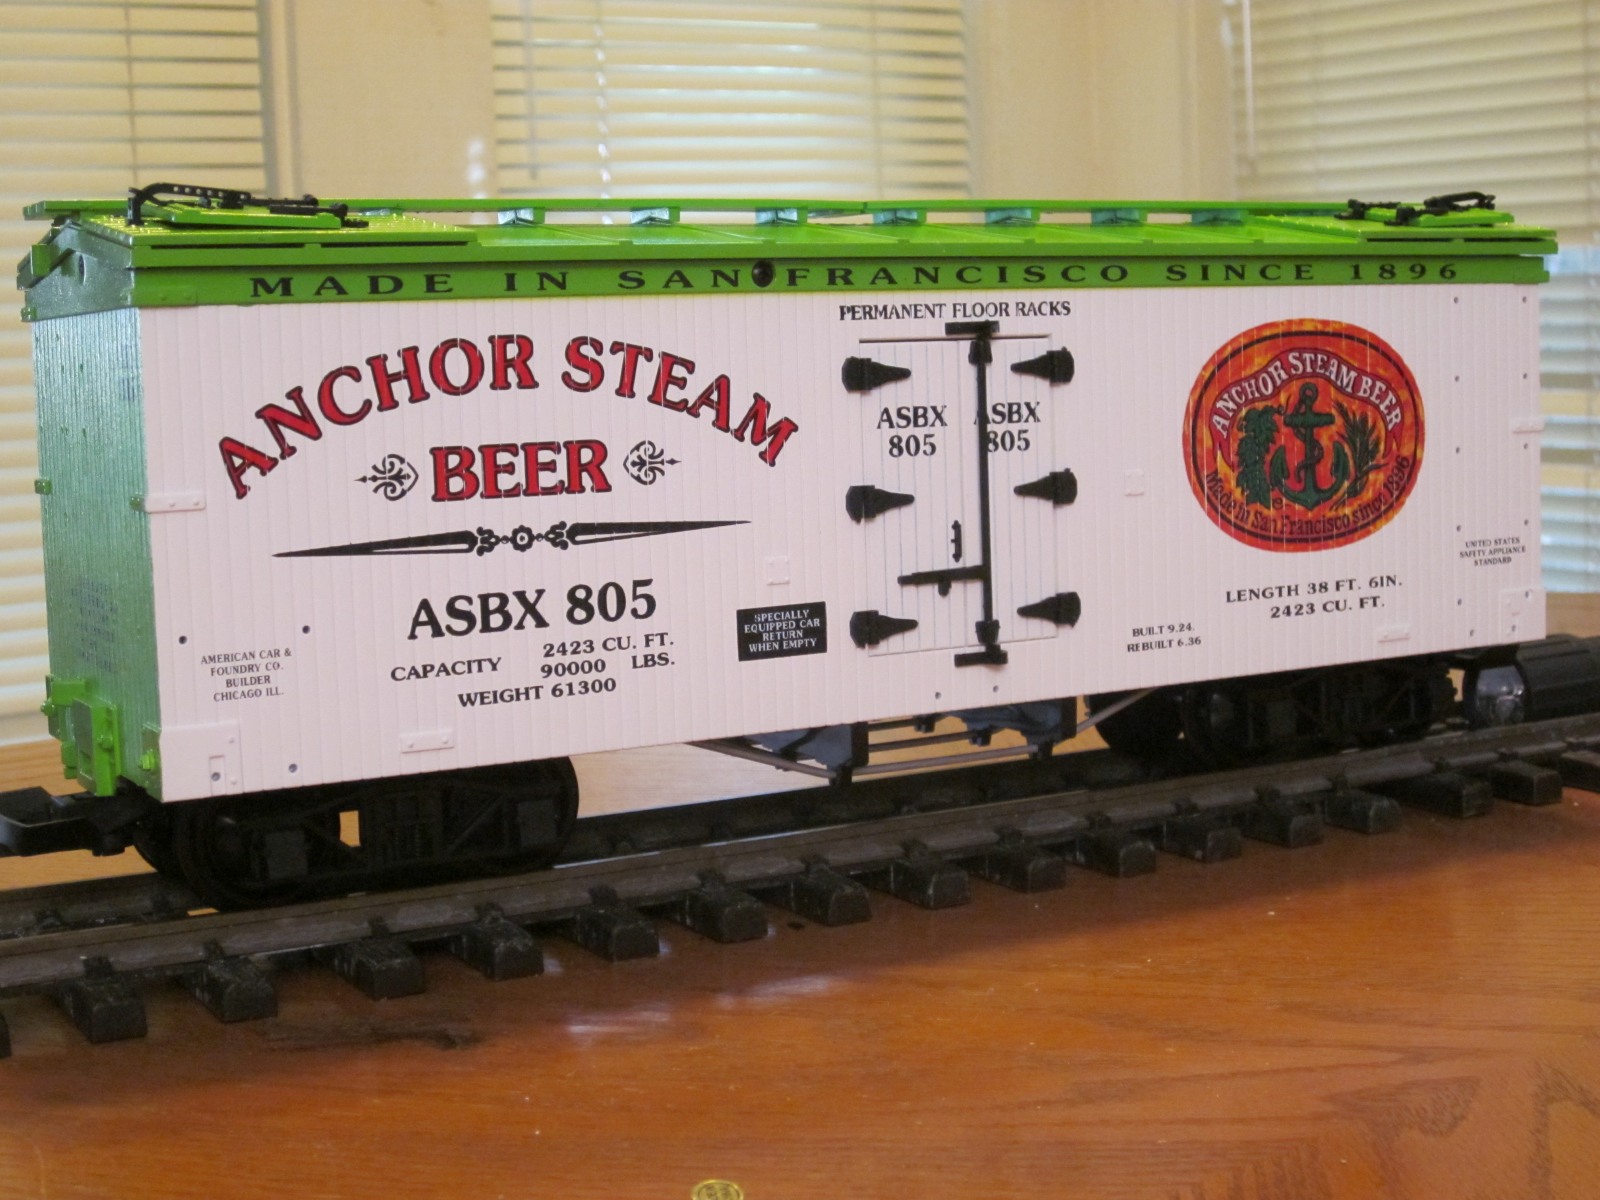 R16185 Anchor Steam Beer ASBX 805